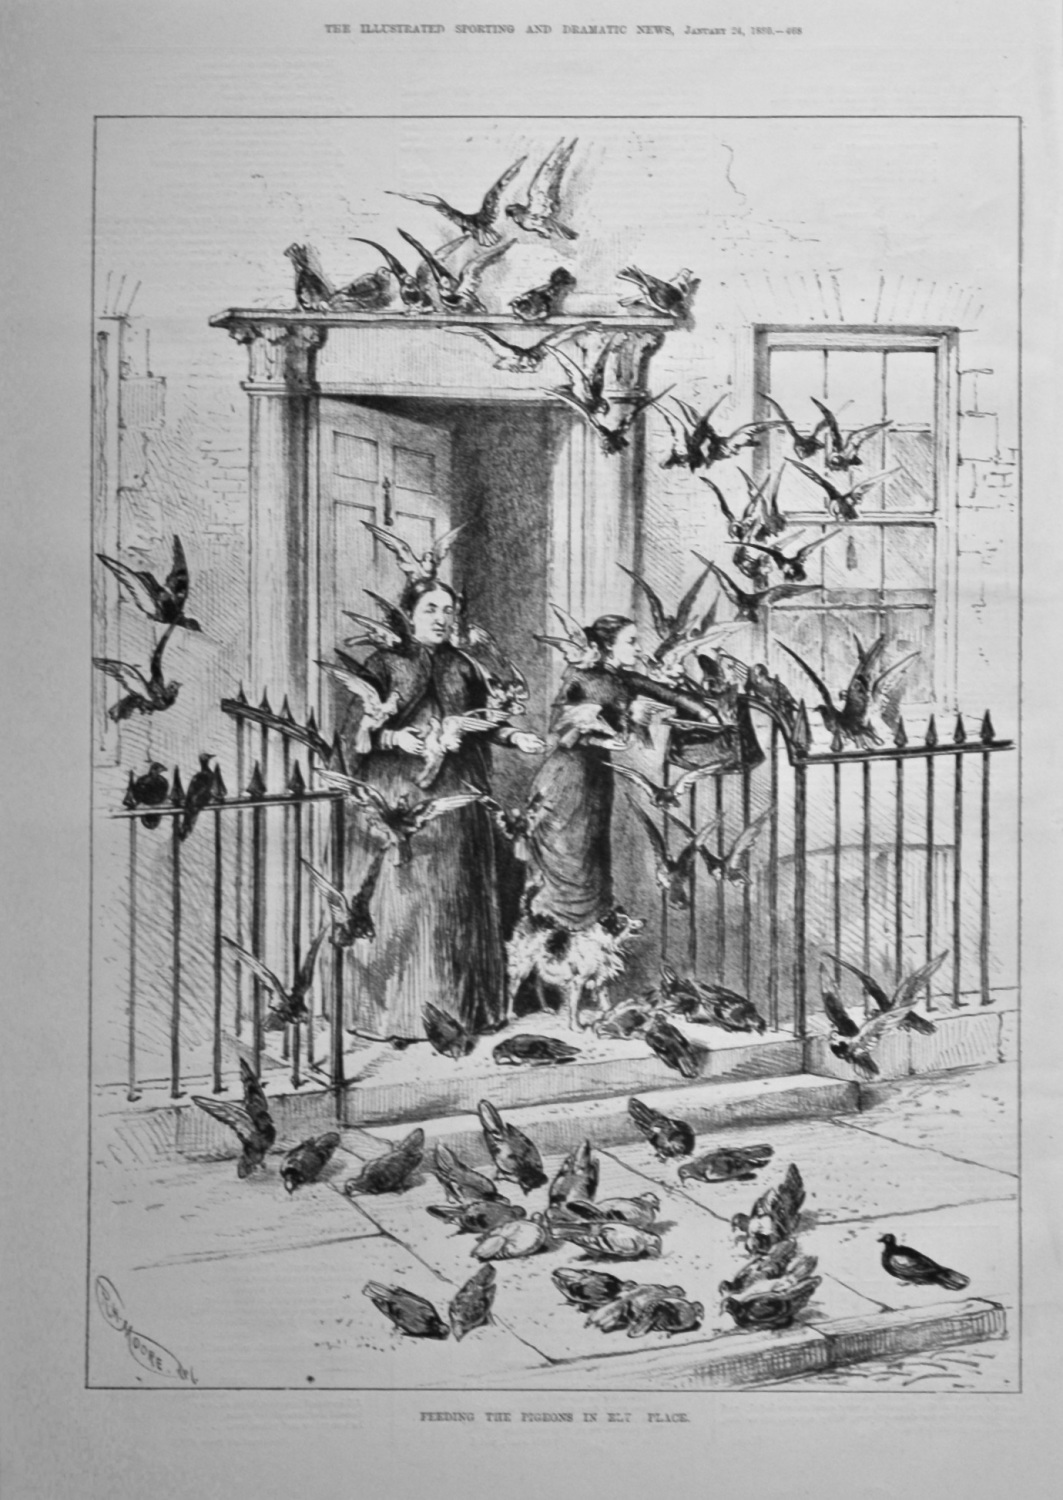 Feeding the Pigeons in Ely Place.  1880.